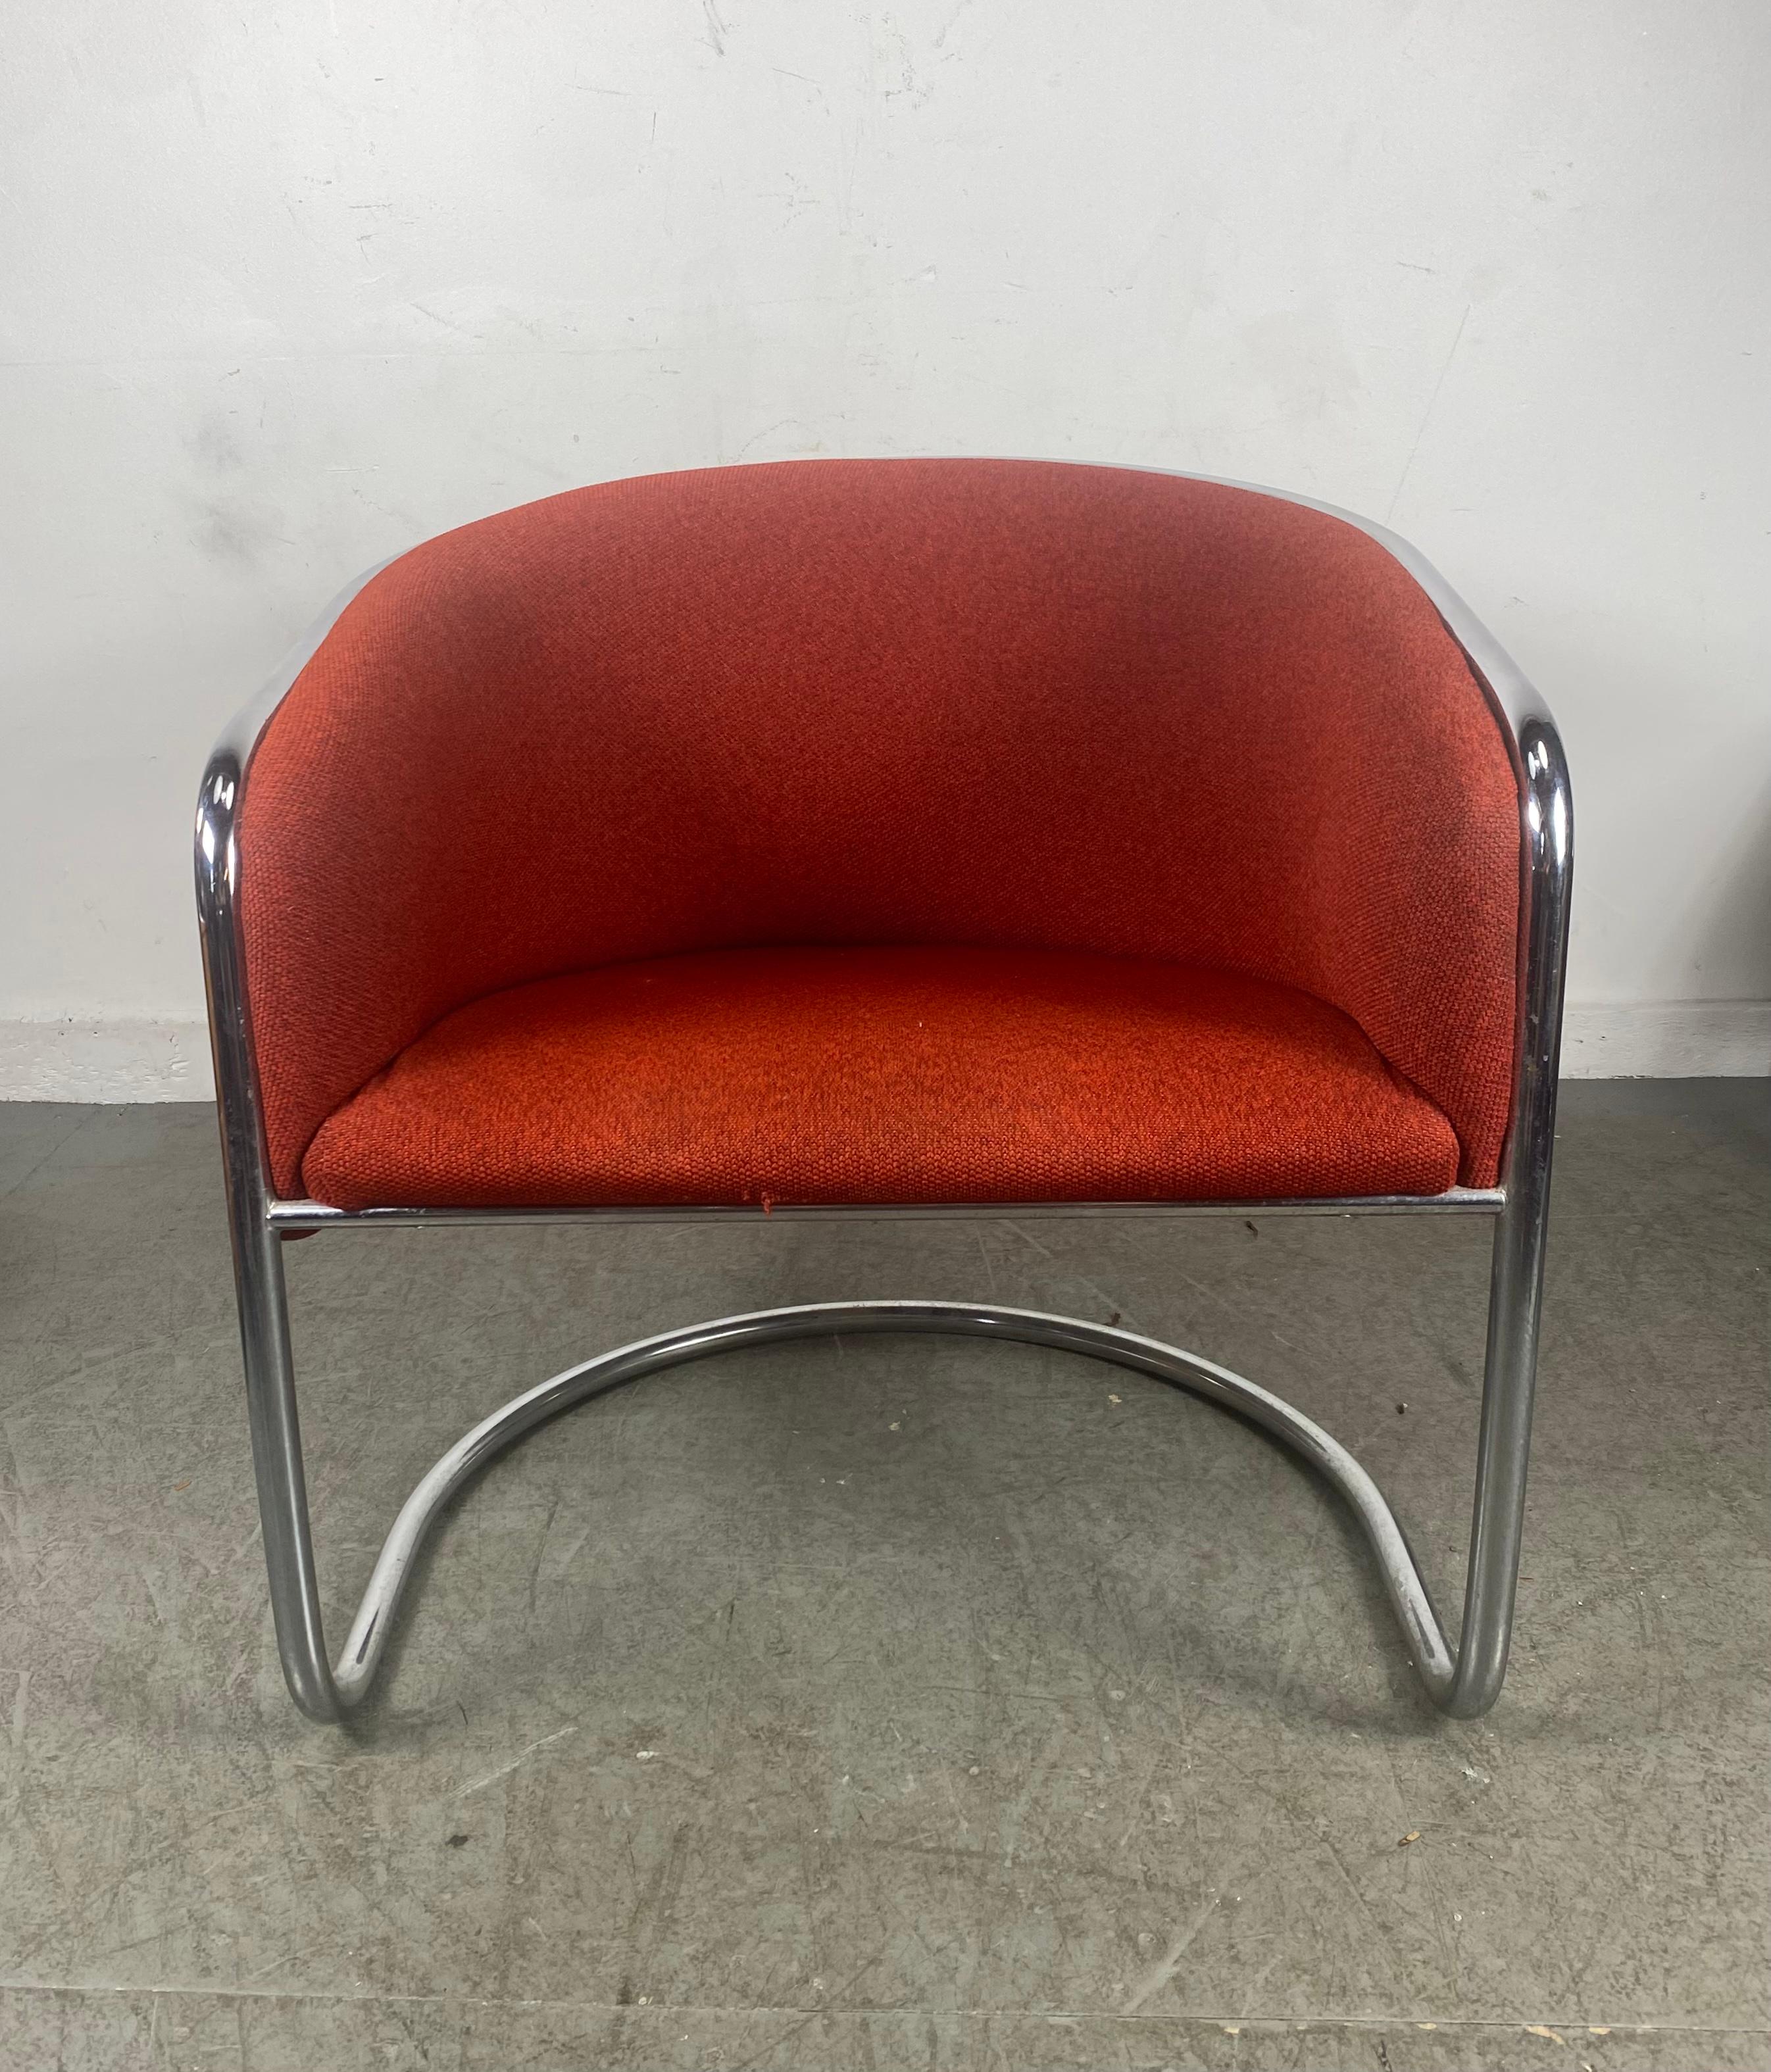 From a design by Joan Burgasser and Anton Lorenz, these Thonet Club Tub armchairs set deeply contoured barrel-back seats, Retains original knoll fabric in a vibrant red, within tubular chrome cantilevered frames.: Hand delivery avail to New York